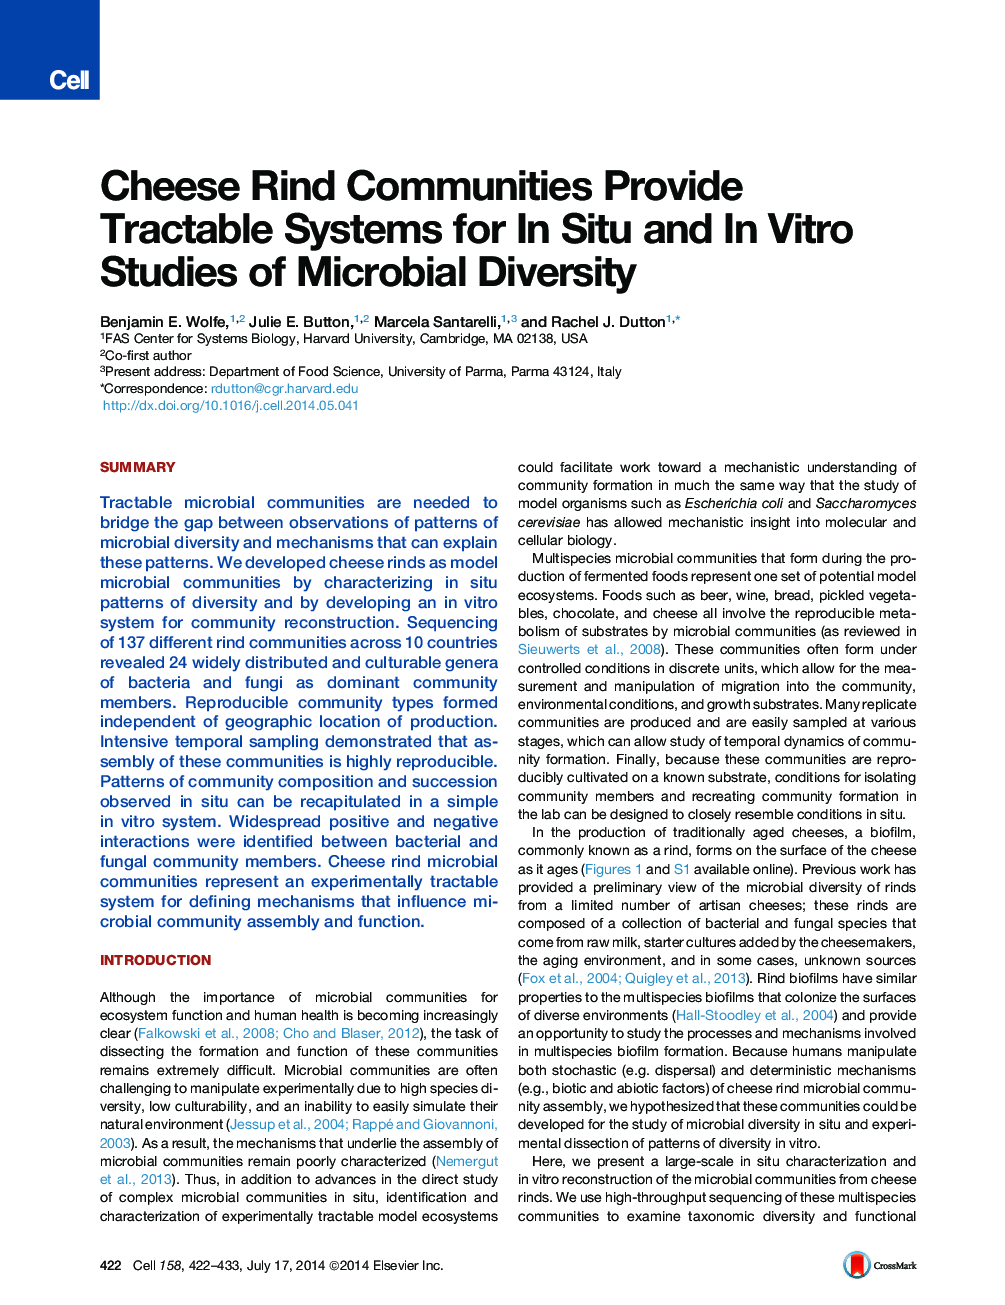 Cheese Rind Communities Provide Tractable Systems for In Situ and In Vitro Studies of Microbial Diversity